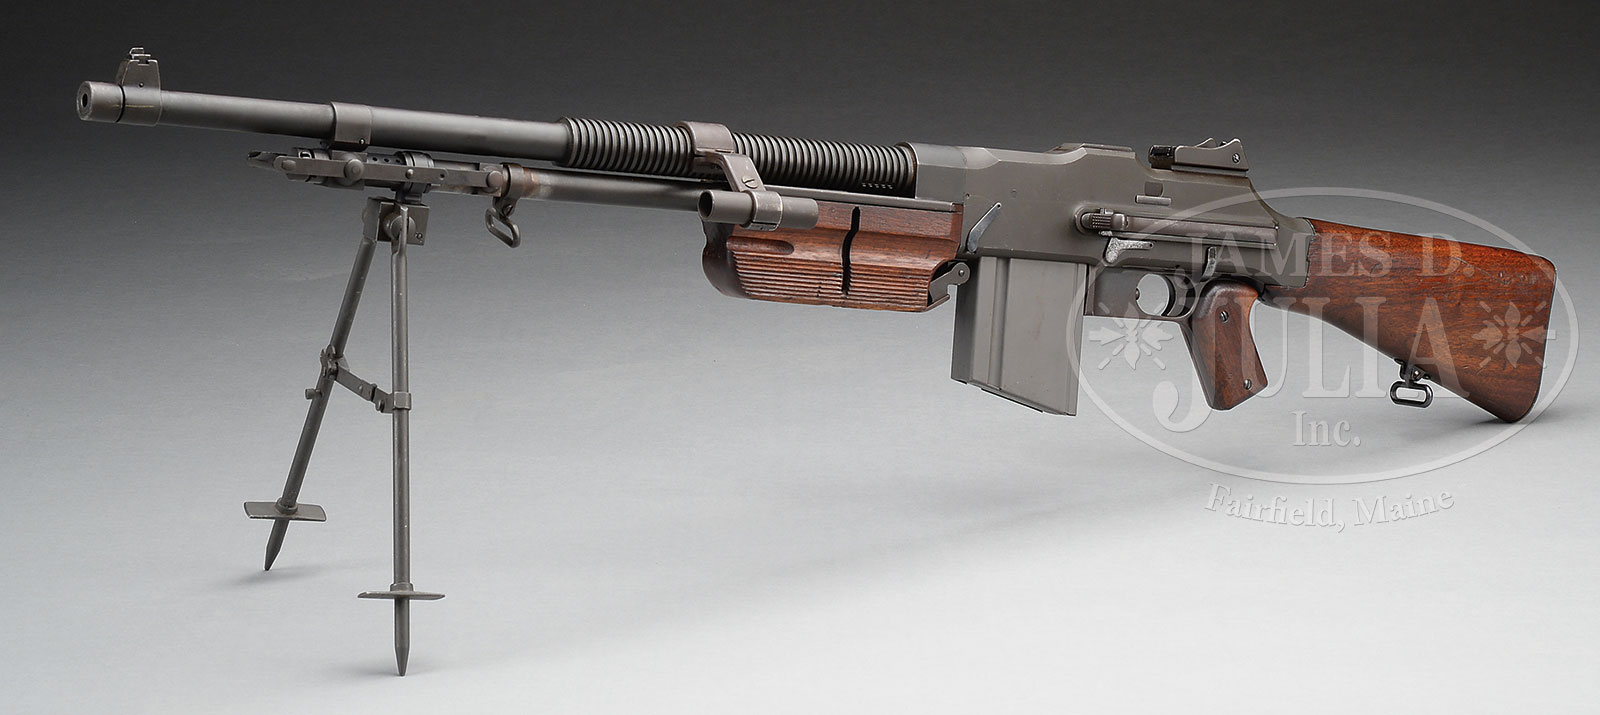 UTTERLY FANTASTIC AND RARE COLT R75A BROWNING AUTOMATIC RIFLE WITH DETACHABLE BARREL (CURIO & RELIC).